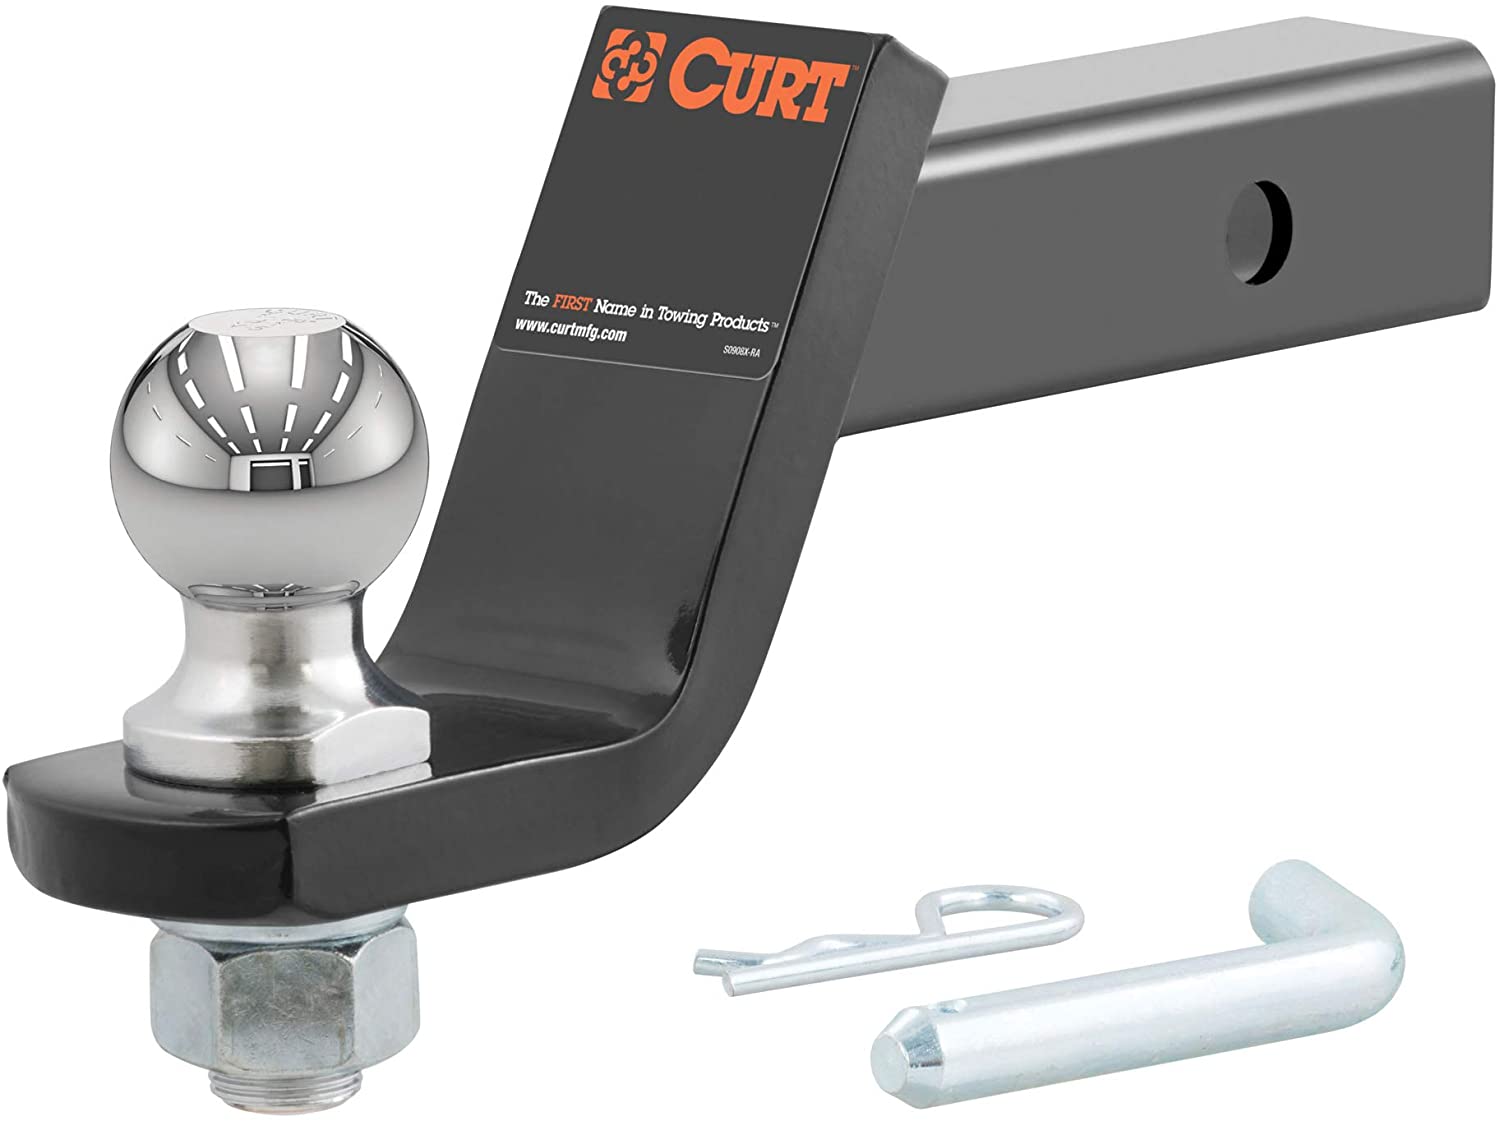 CURT 45056 Trailer Hitch Mount with 2-Inch Ball & Pin, Fits 2-In Receiver, 7,500 lbs, 4-Inch Drop